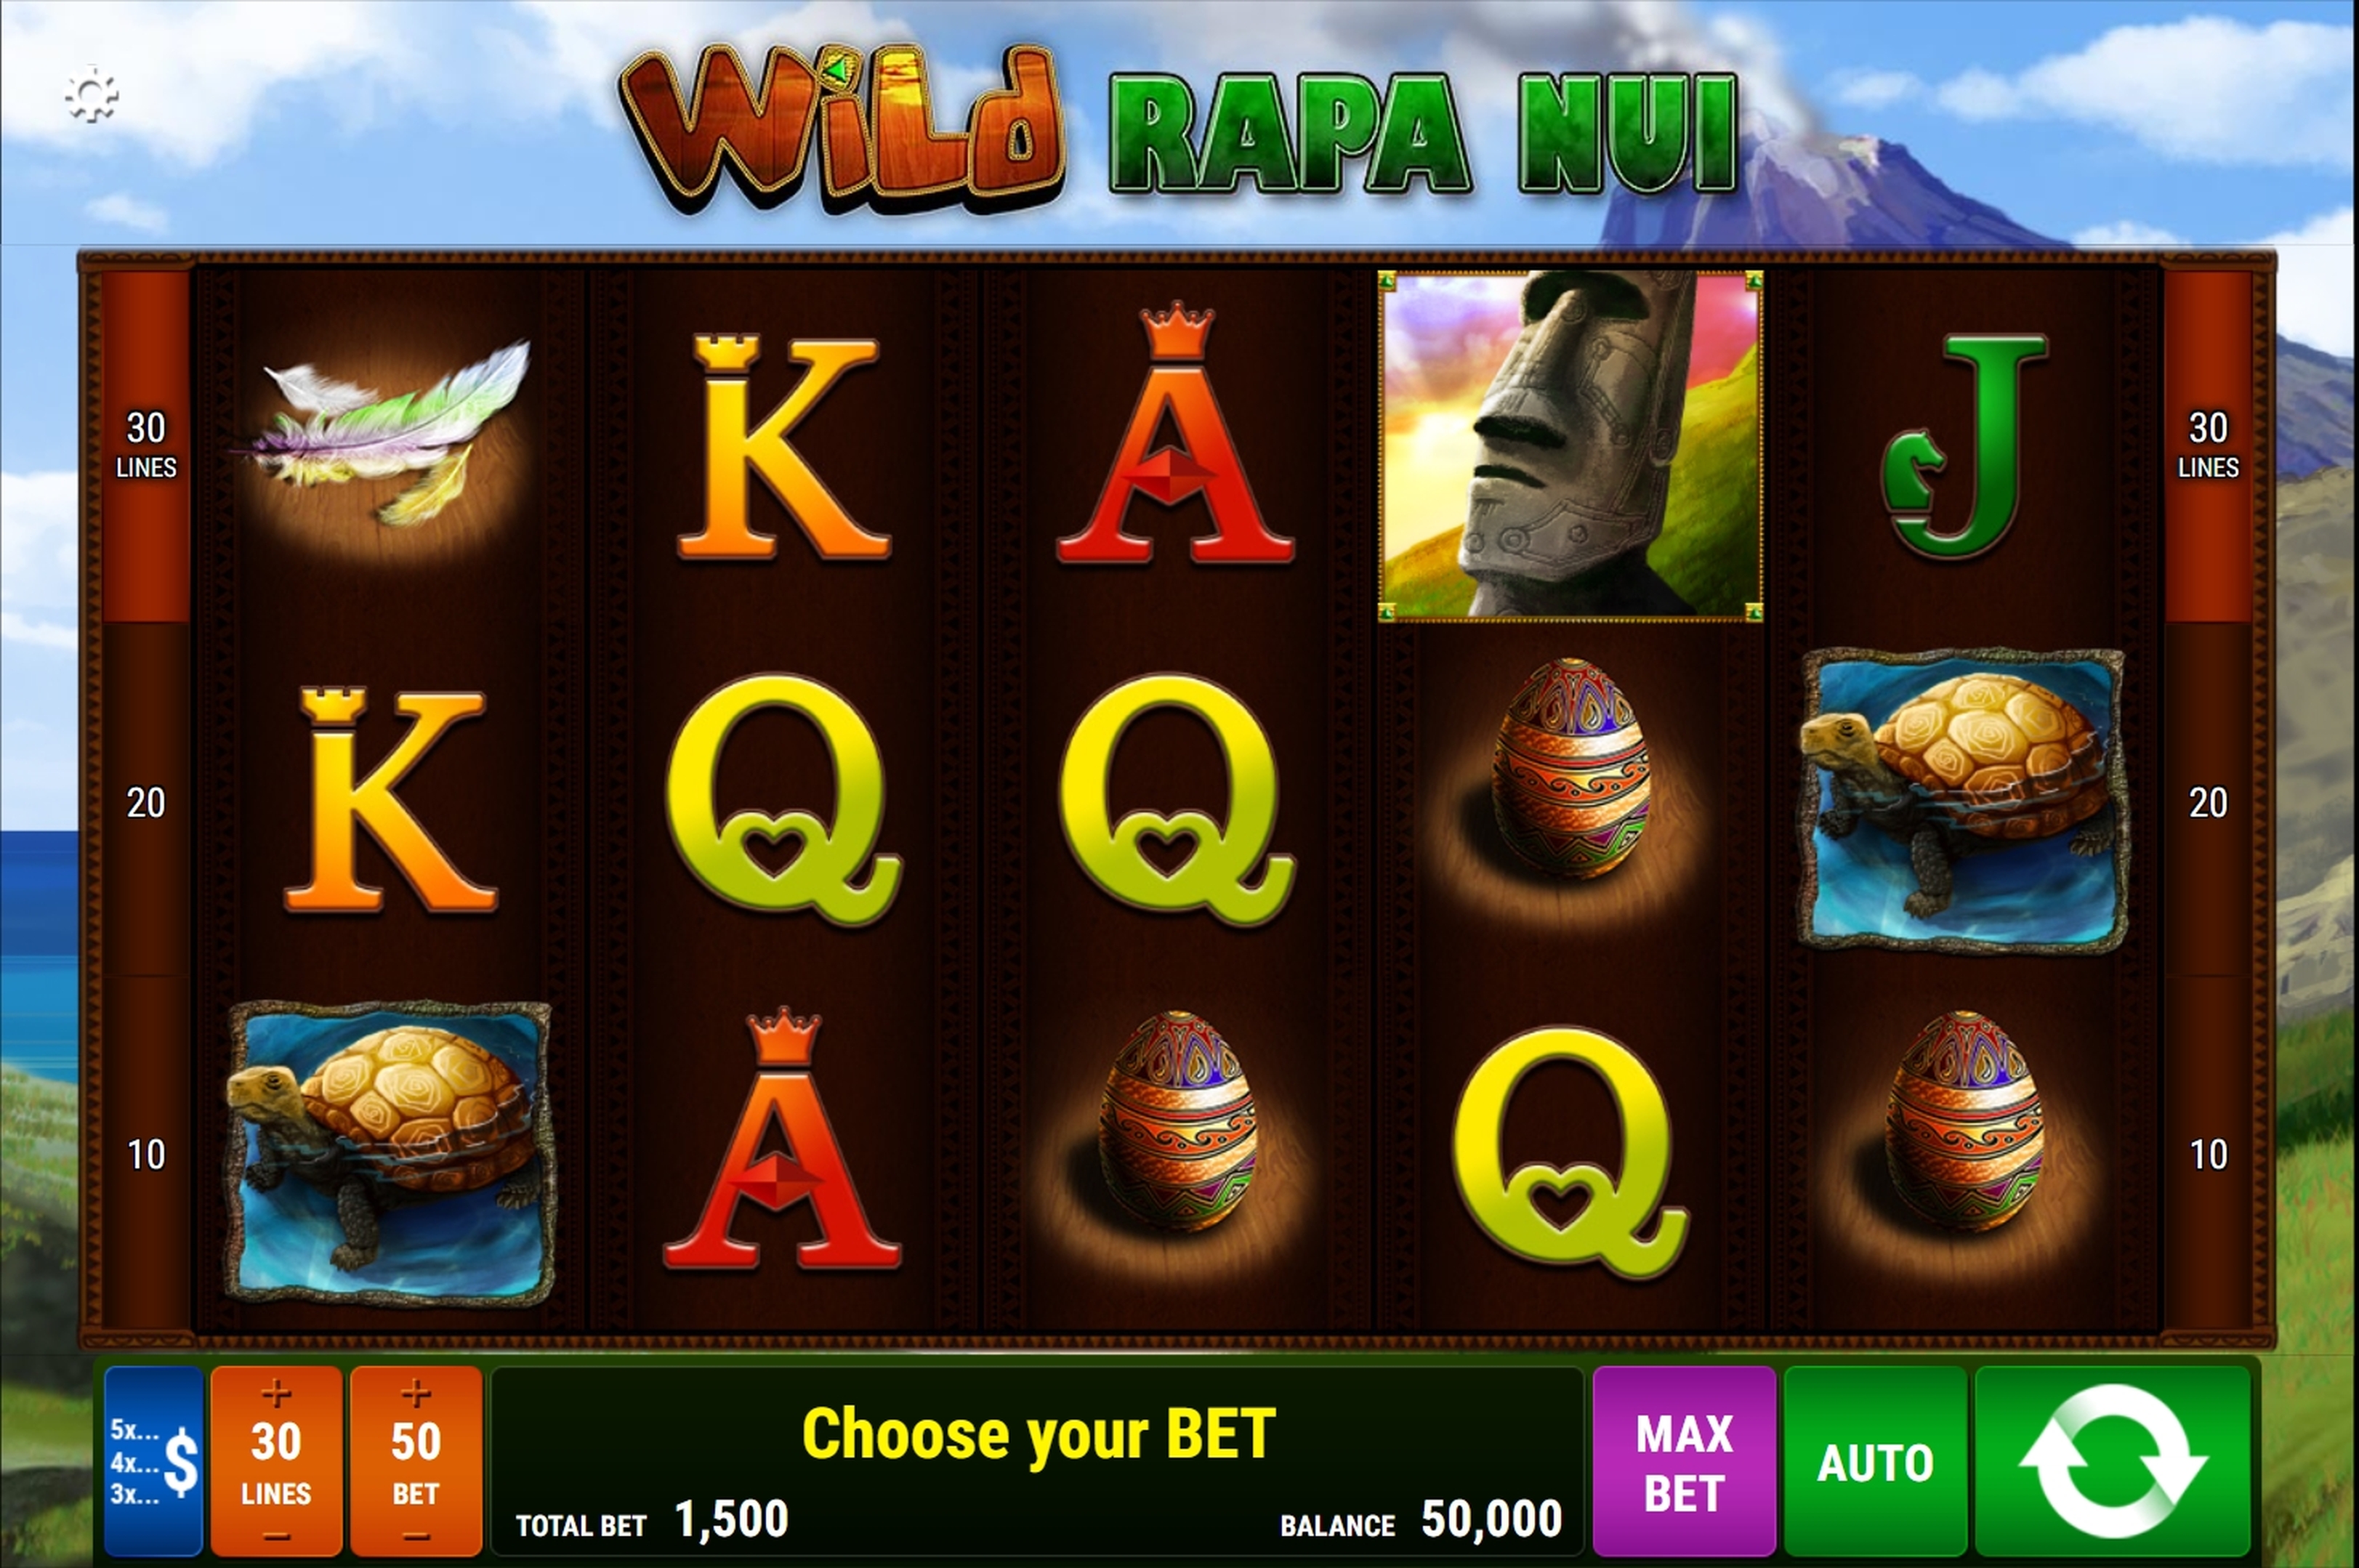 Reels in Wild Rapa Nui Slot Game by Bally Wulff